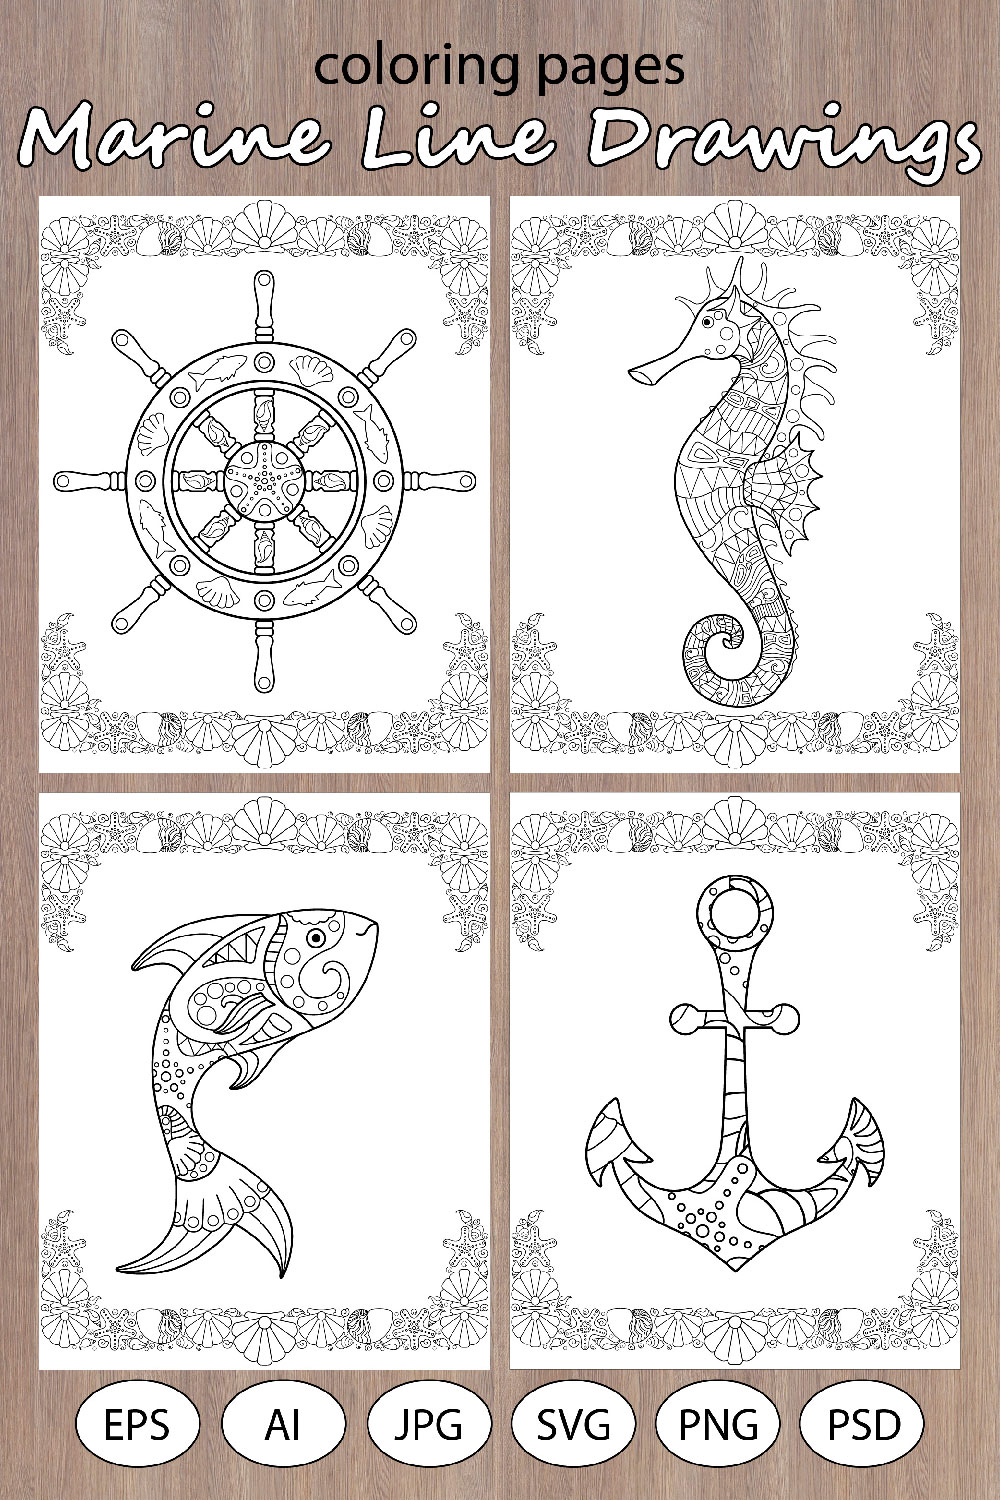 7 Marine Line Drawings for coloring pinterest preview image.